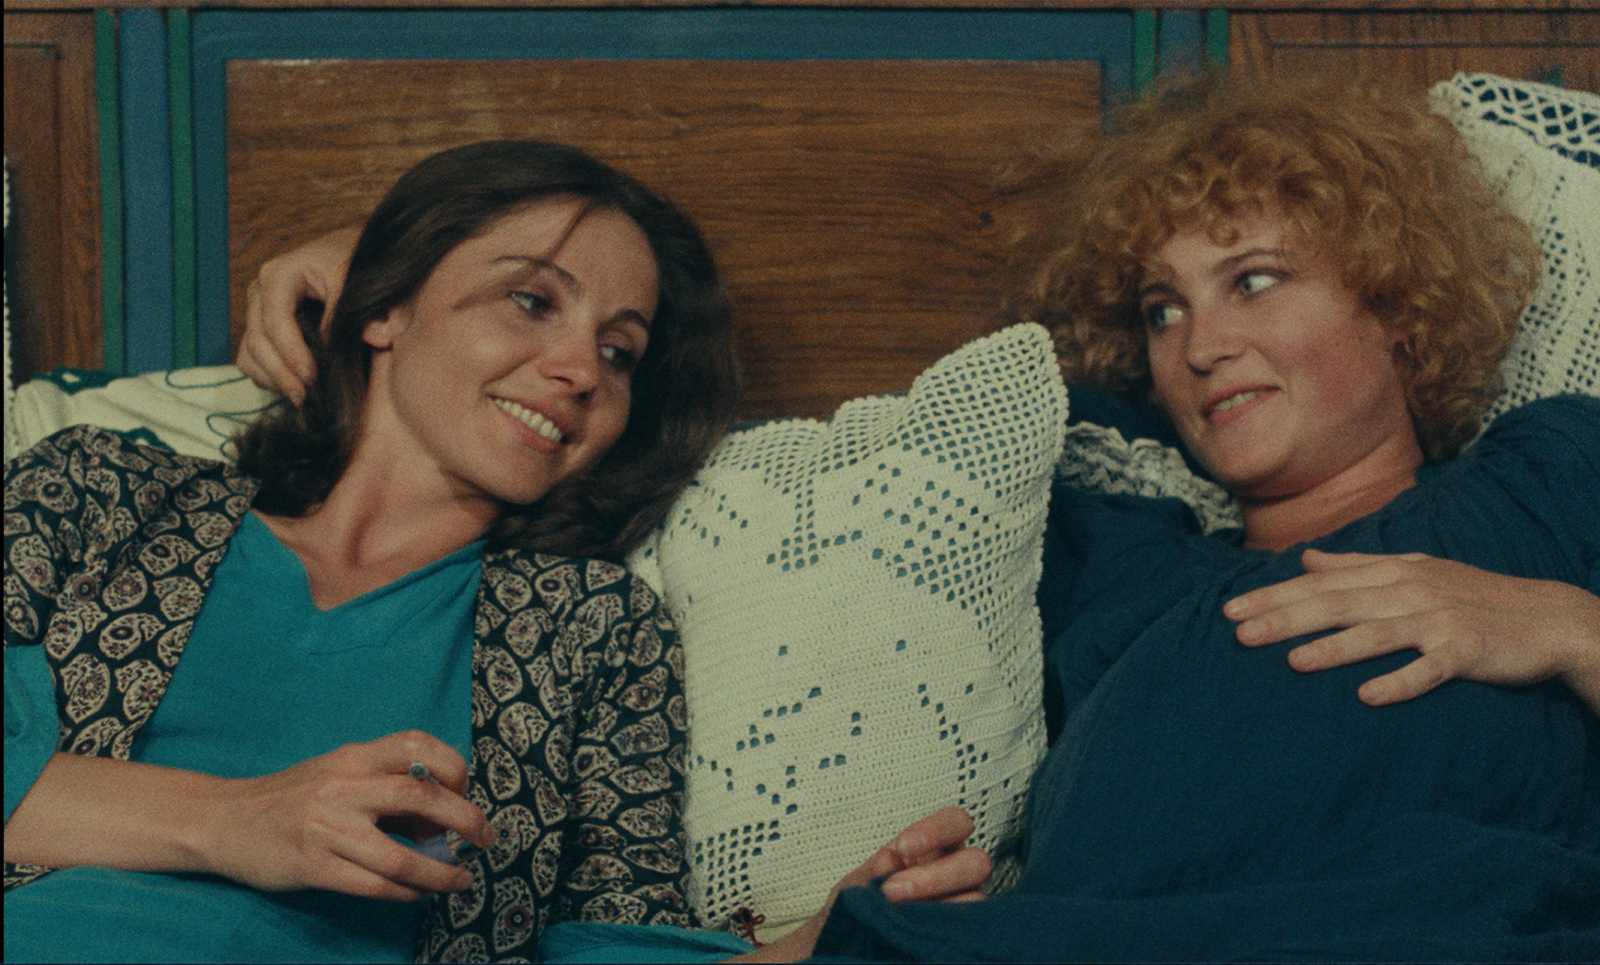 Thérèse Liotard and Valérie Mairesse lounge next to one another and talk in a still from Agnès Varda's 1977 film, "One Sings, the Other Doesn't"